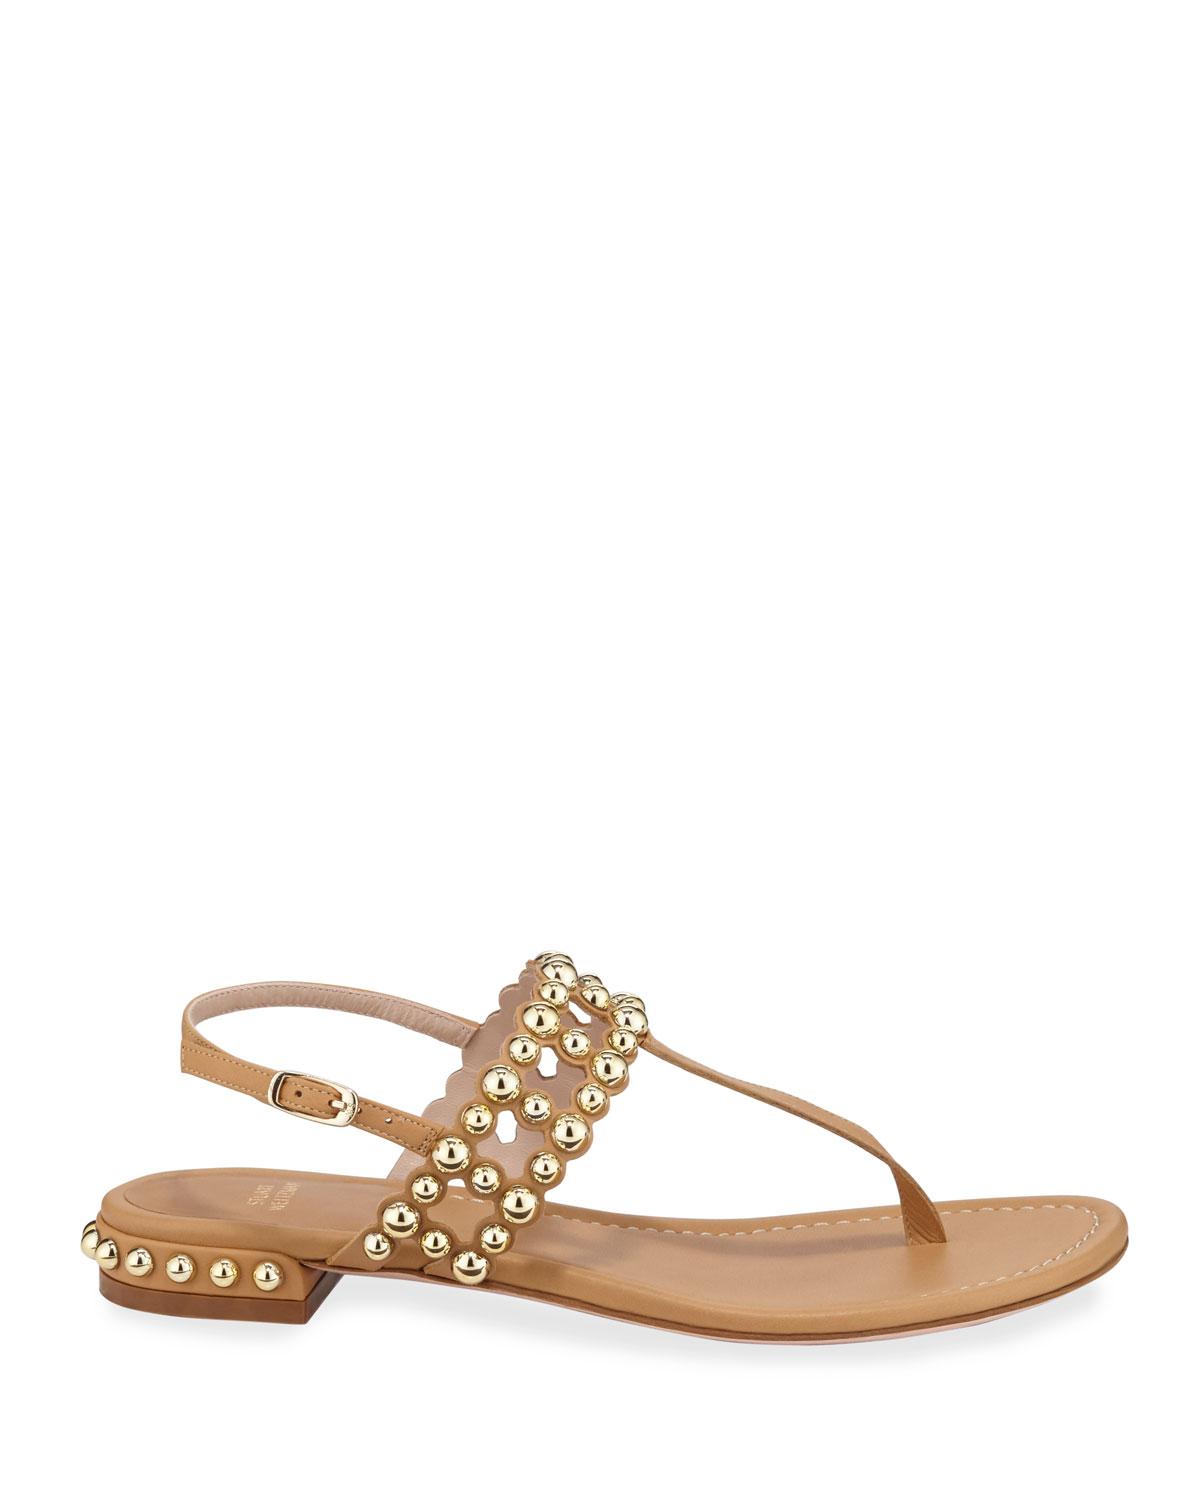 Stuart Weitzman Leather Taxi Studded T-strap Flat Sandals in Camel ...